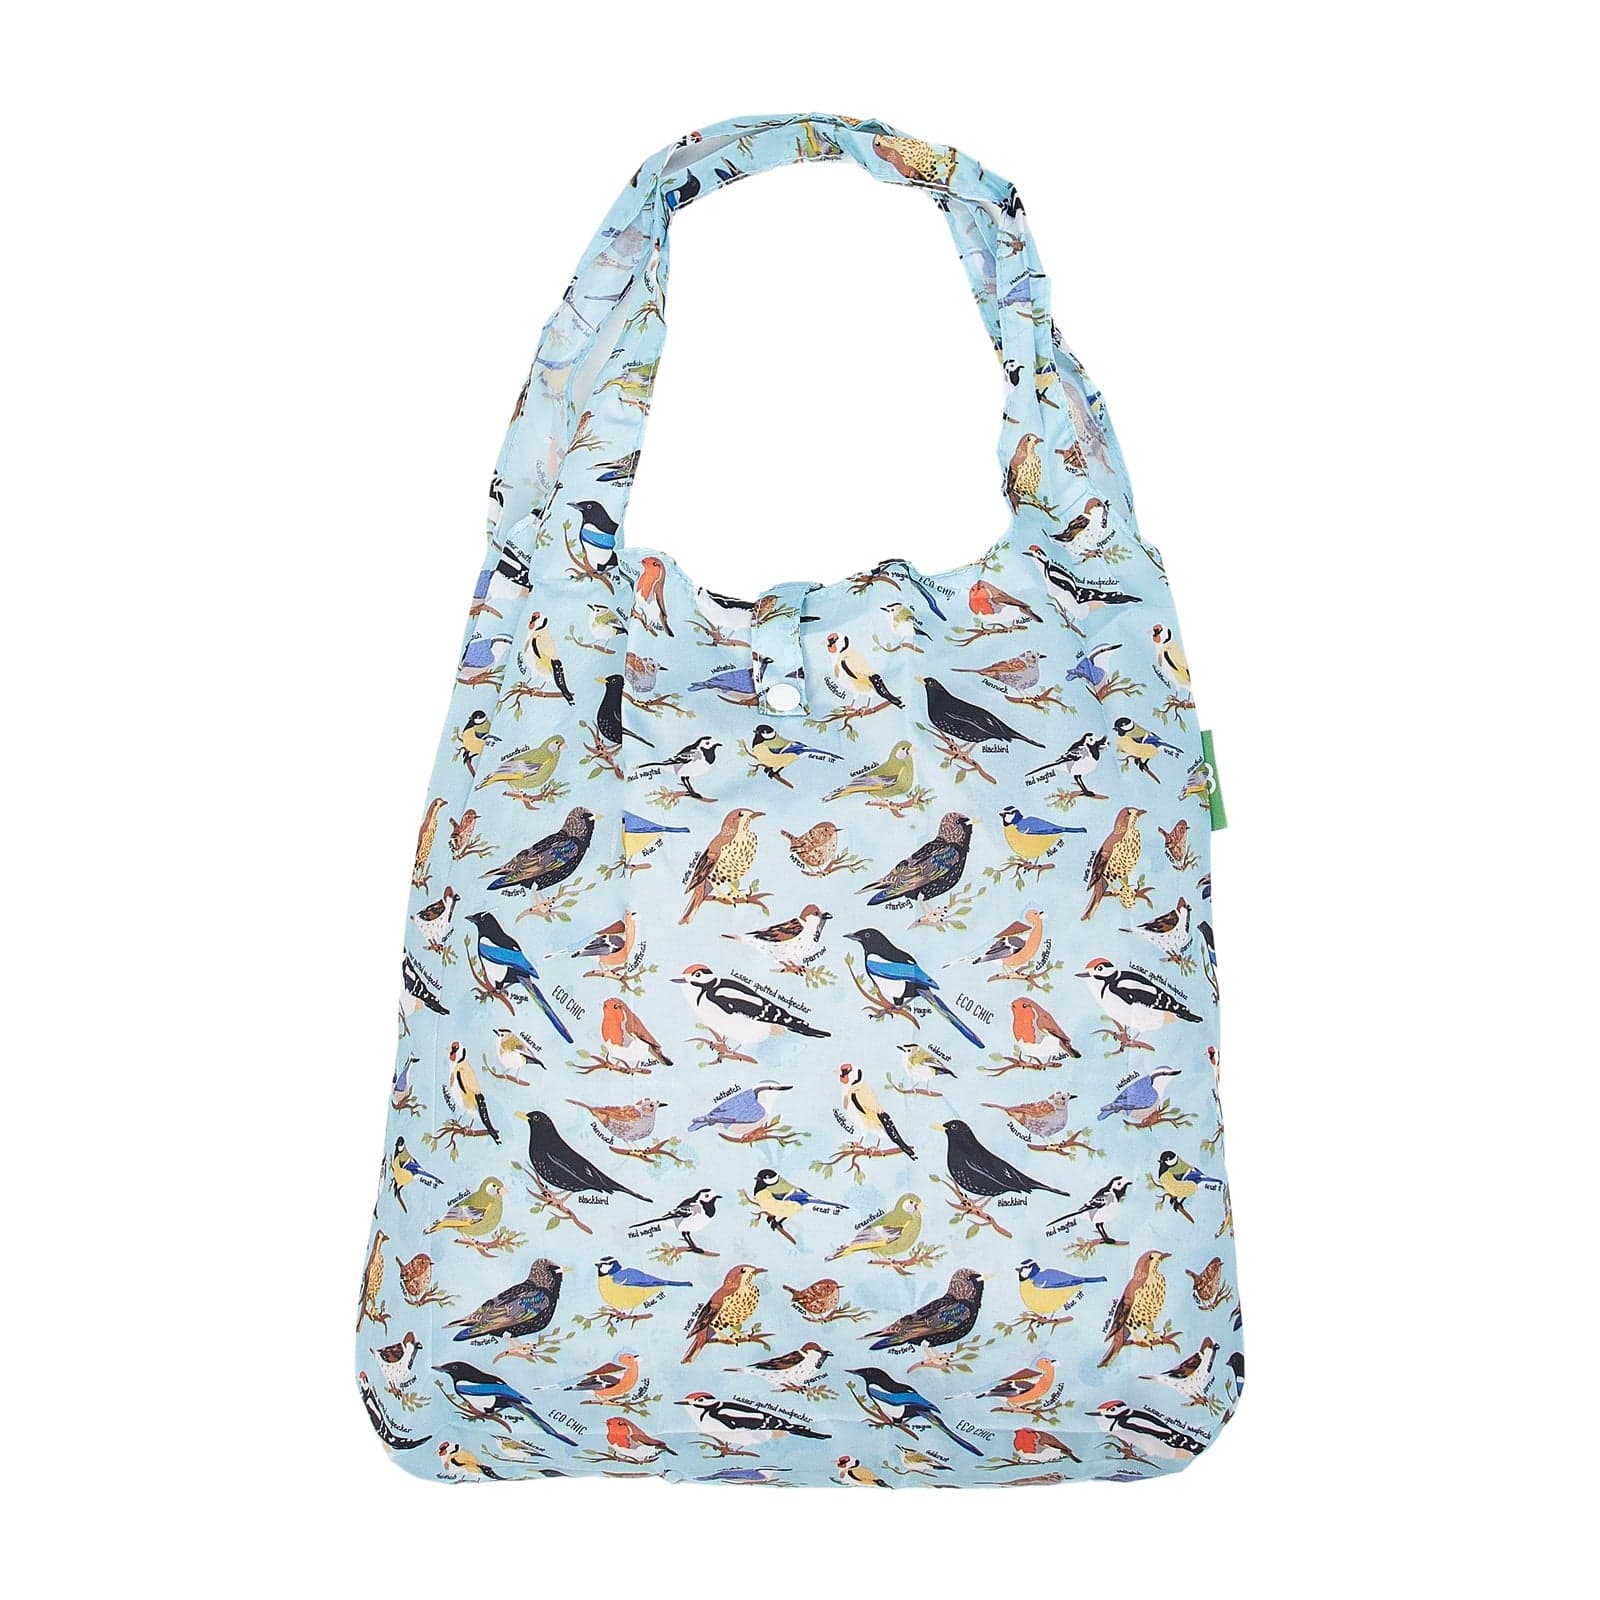 Eco Chic Blue Eco Chic Lightweight Foldable Reusable Shopping Bag Wild Birds